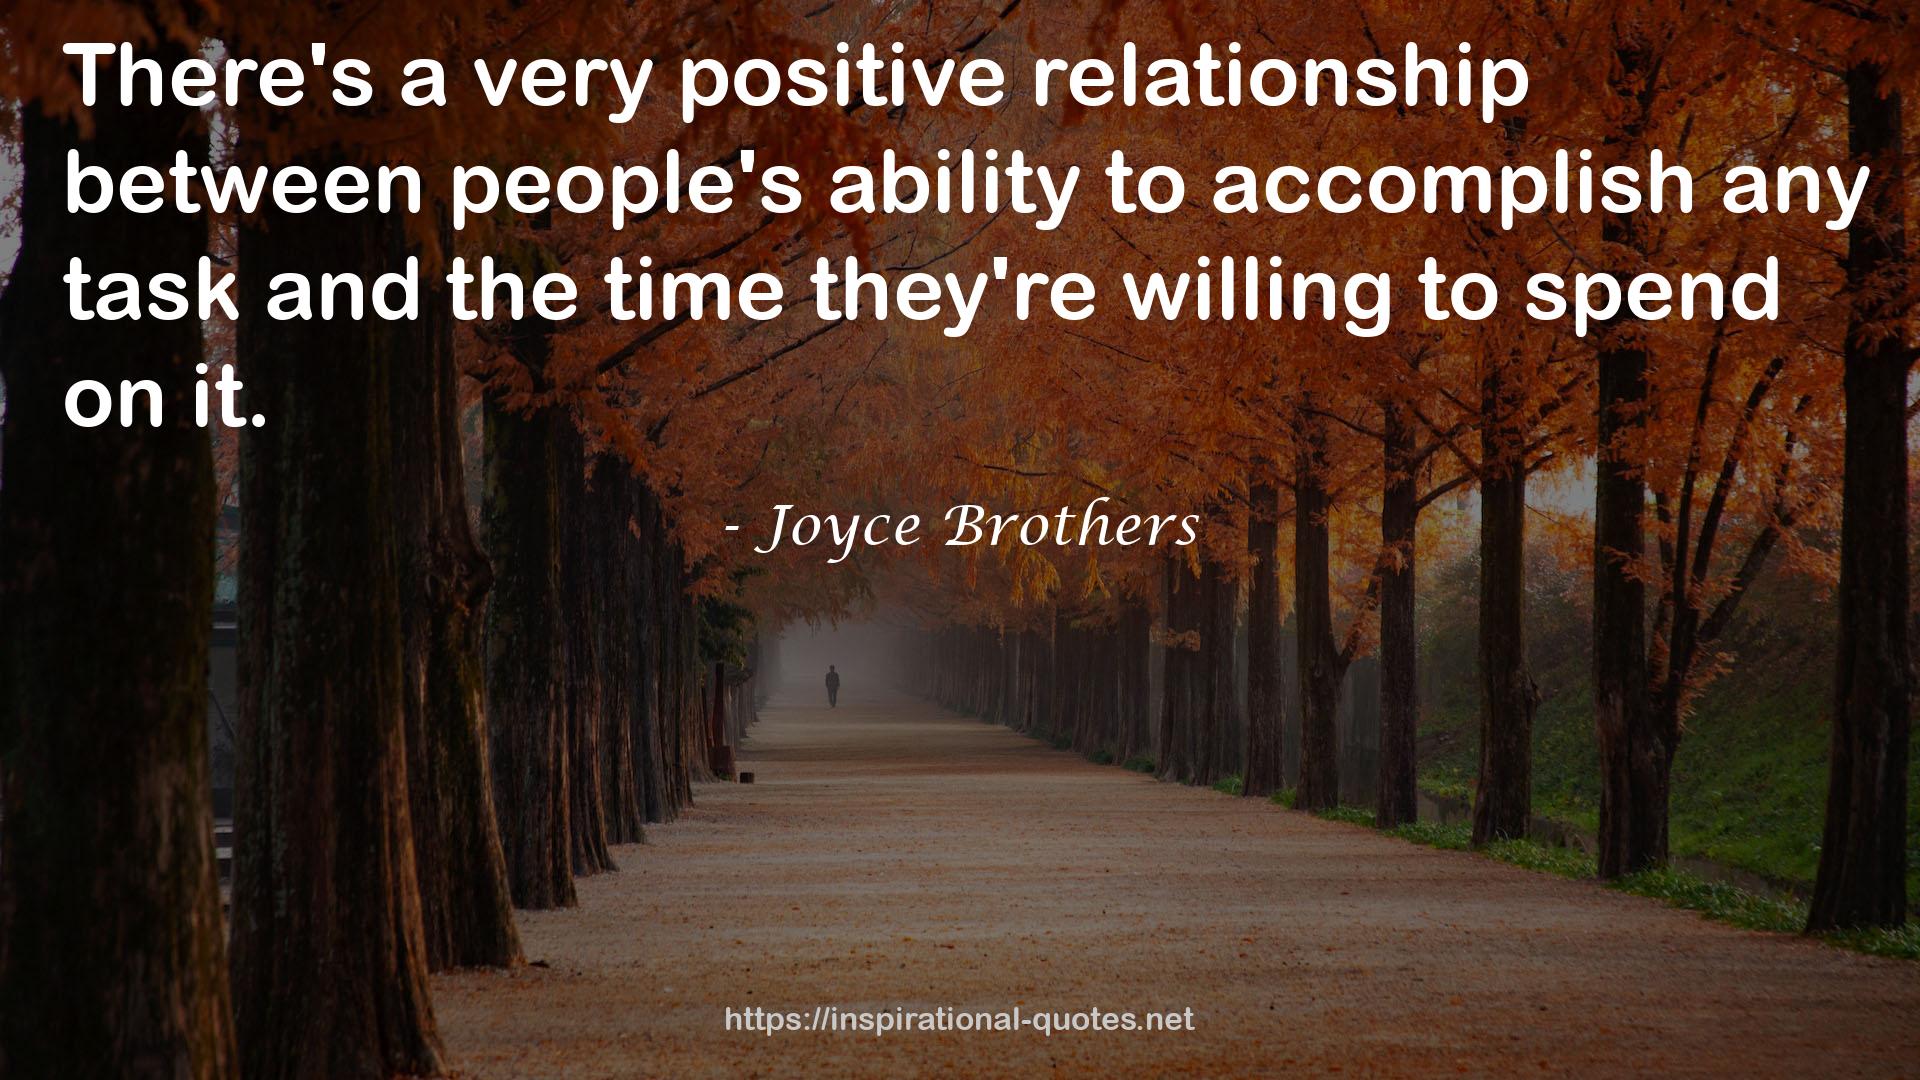 Joyce Brothers QUOTES